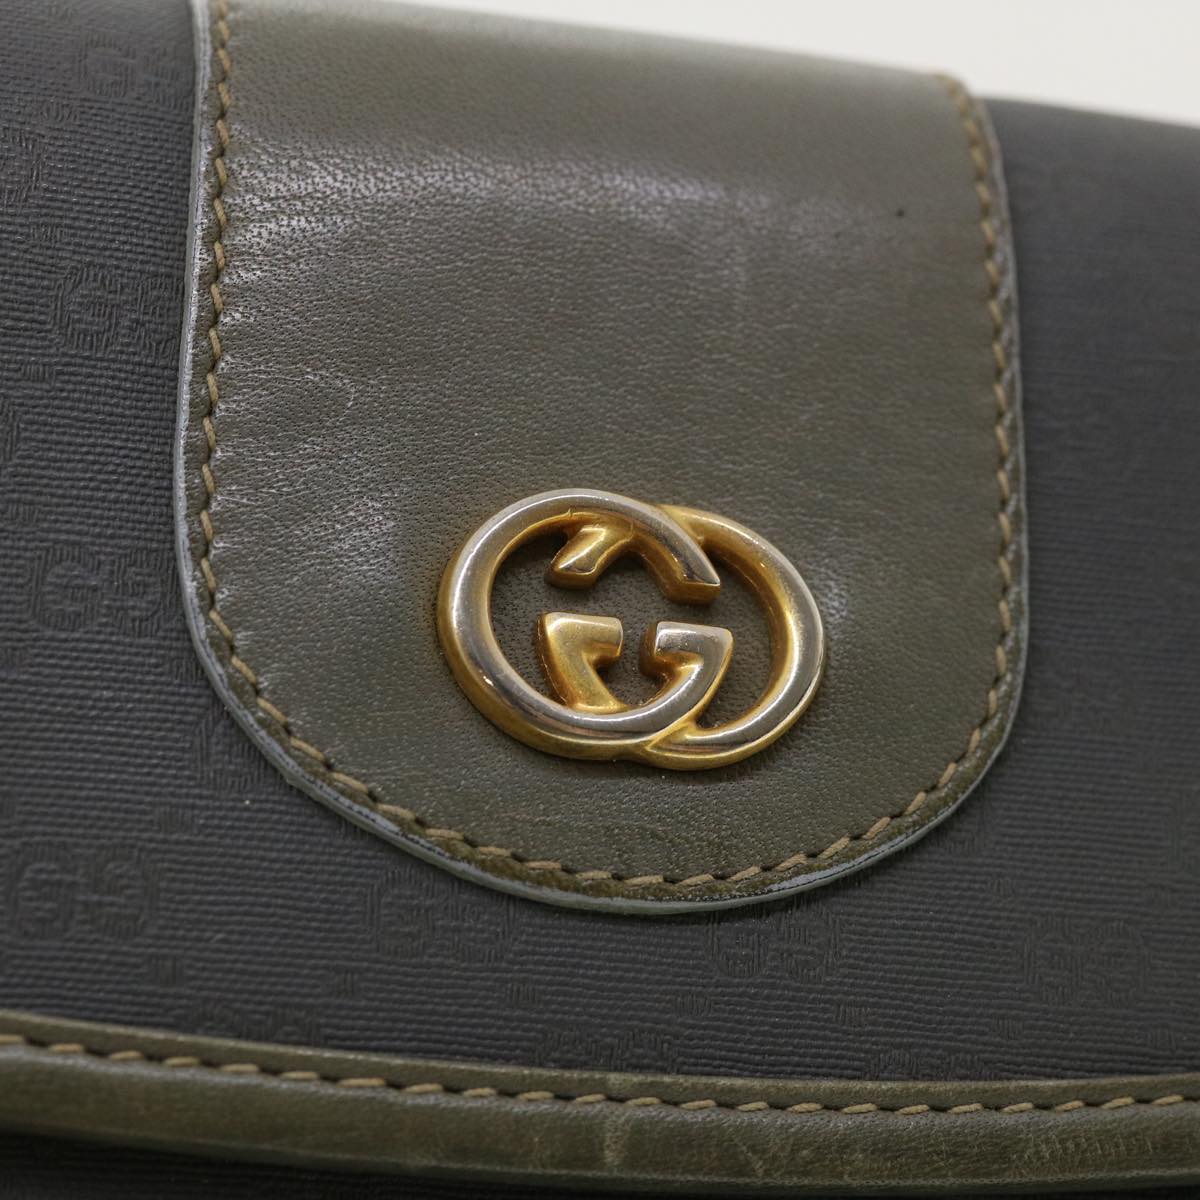 GUCCI Micro GG Canvas Shoulder Bag Gray Auth bs3248